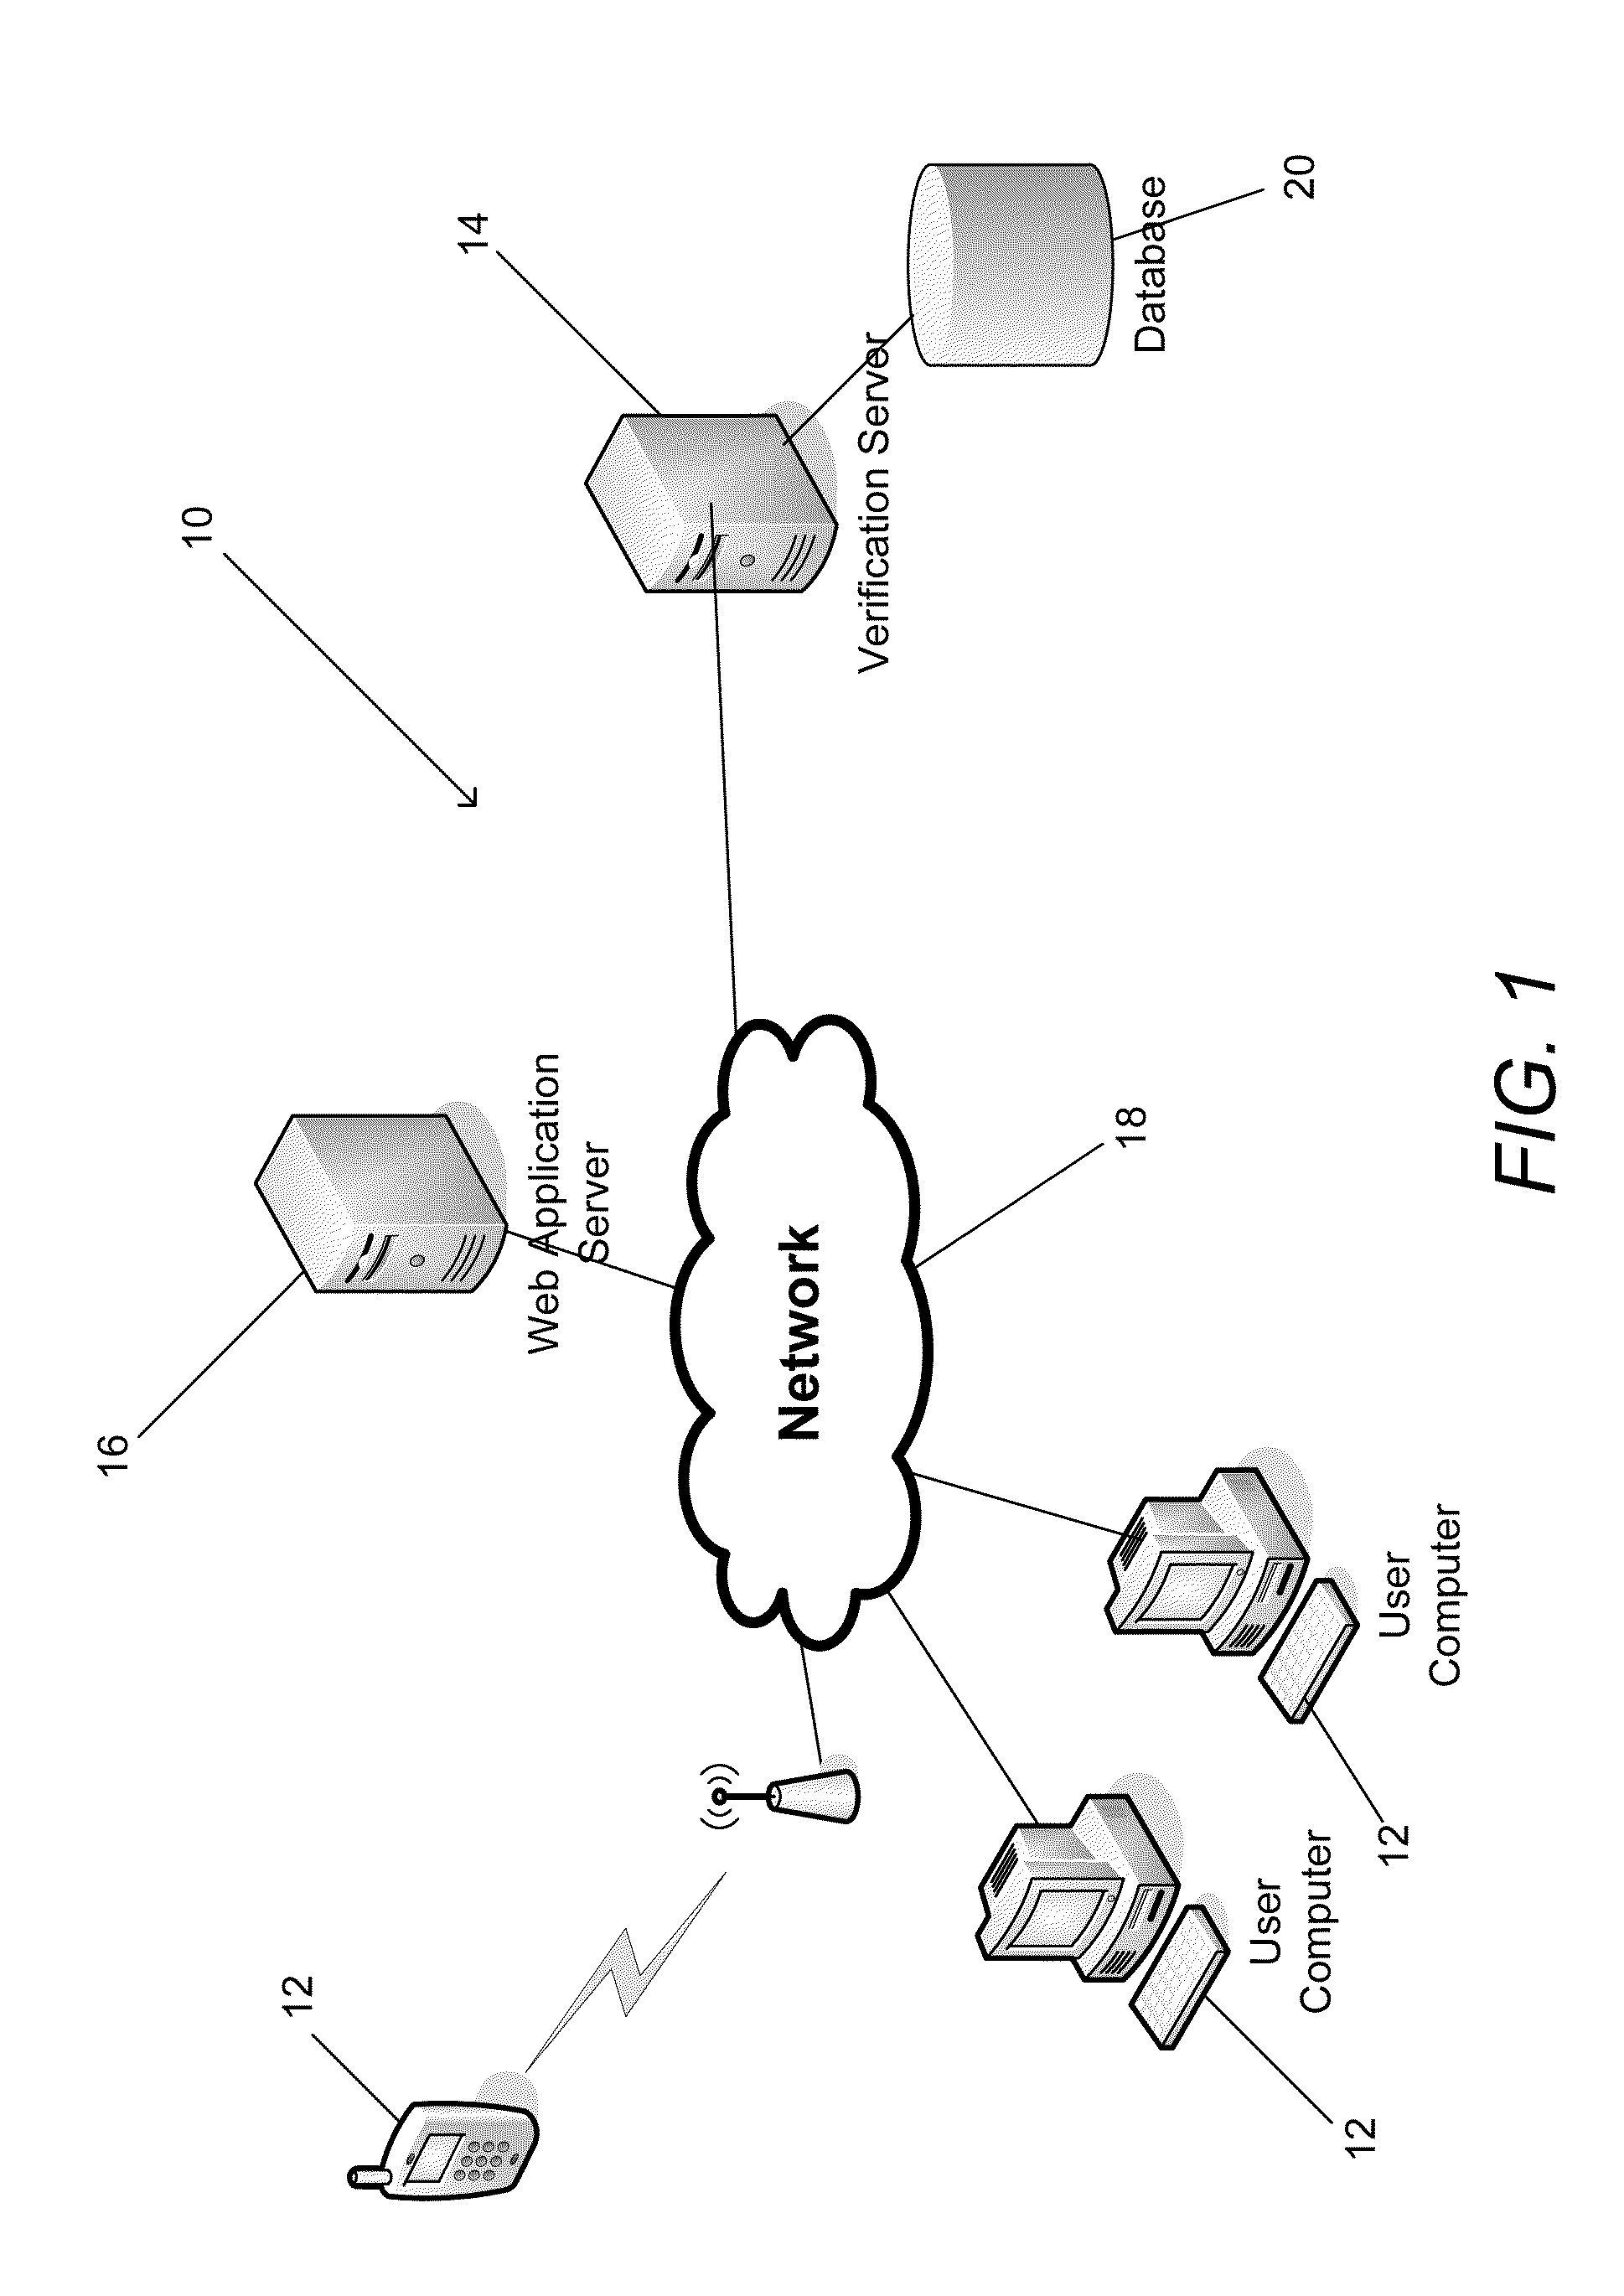 Systems and methods for integration of an application runtime environment into a user computing environment